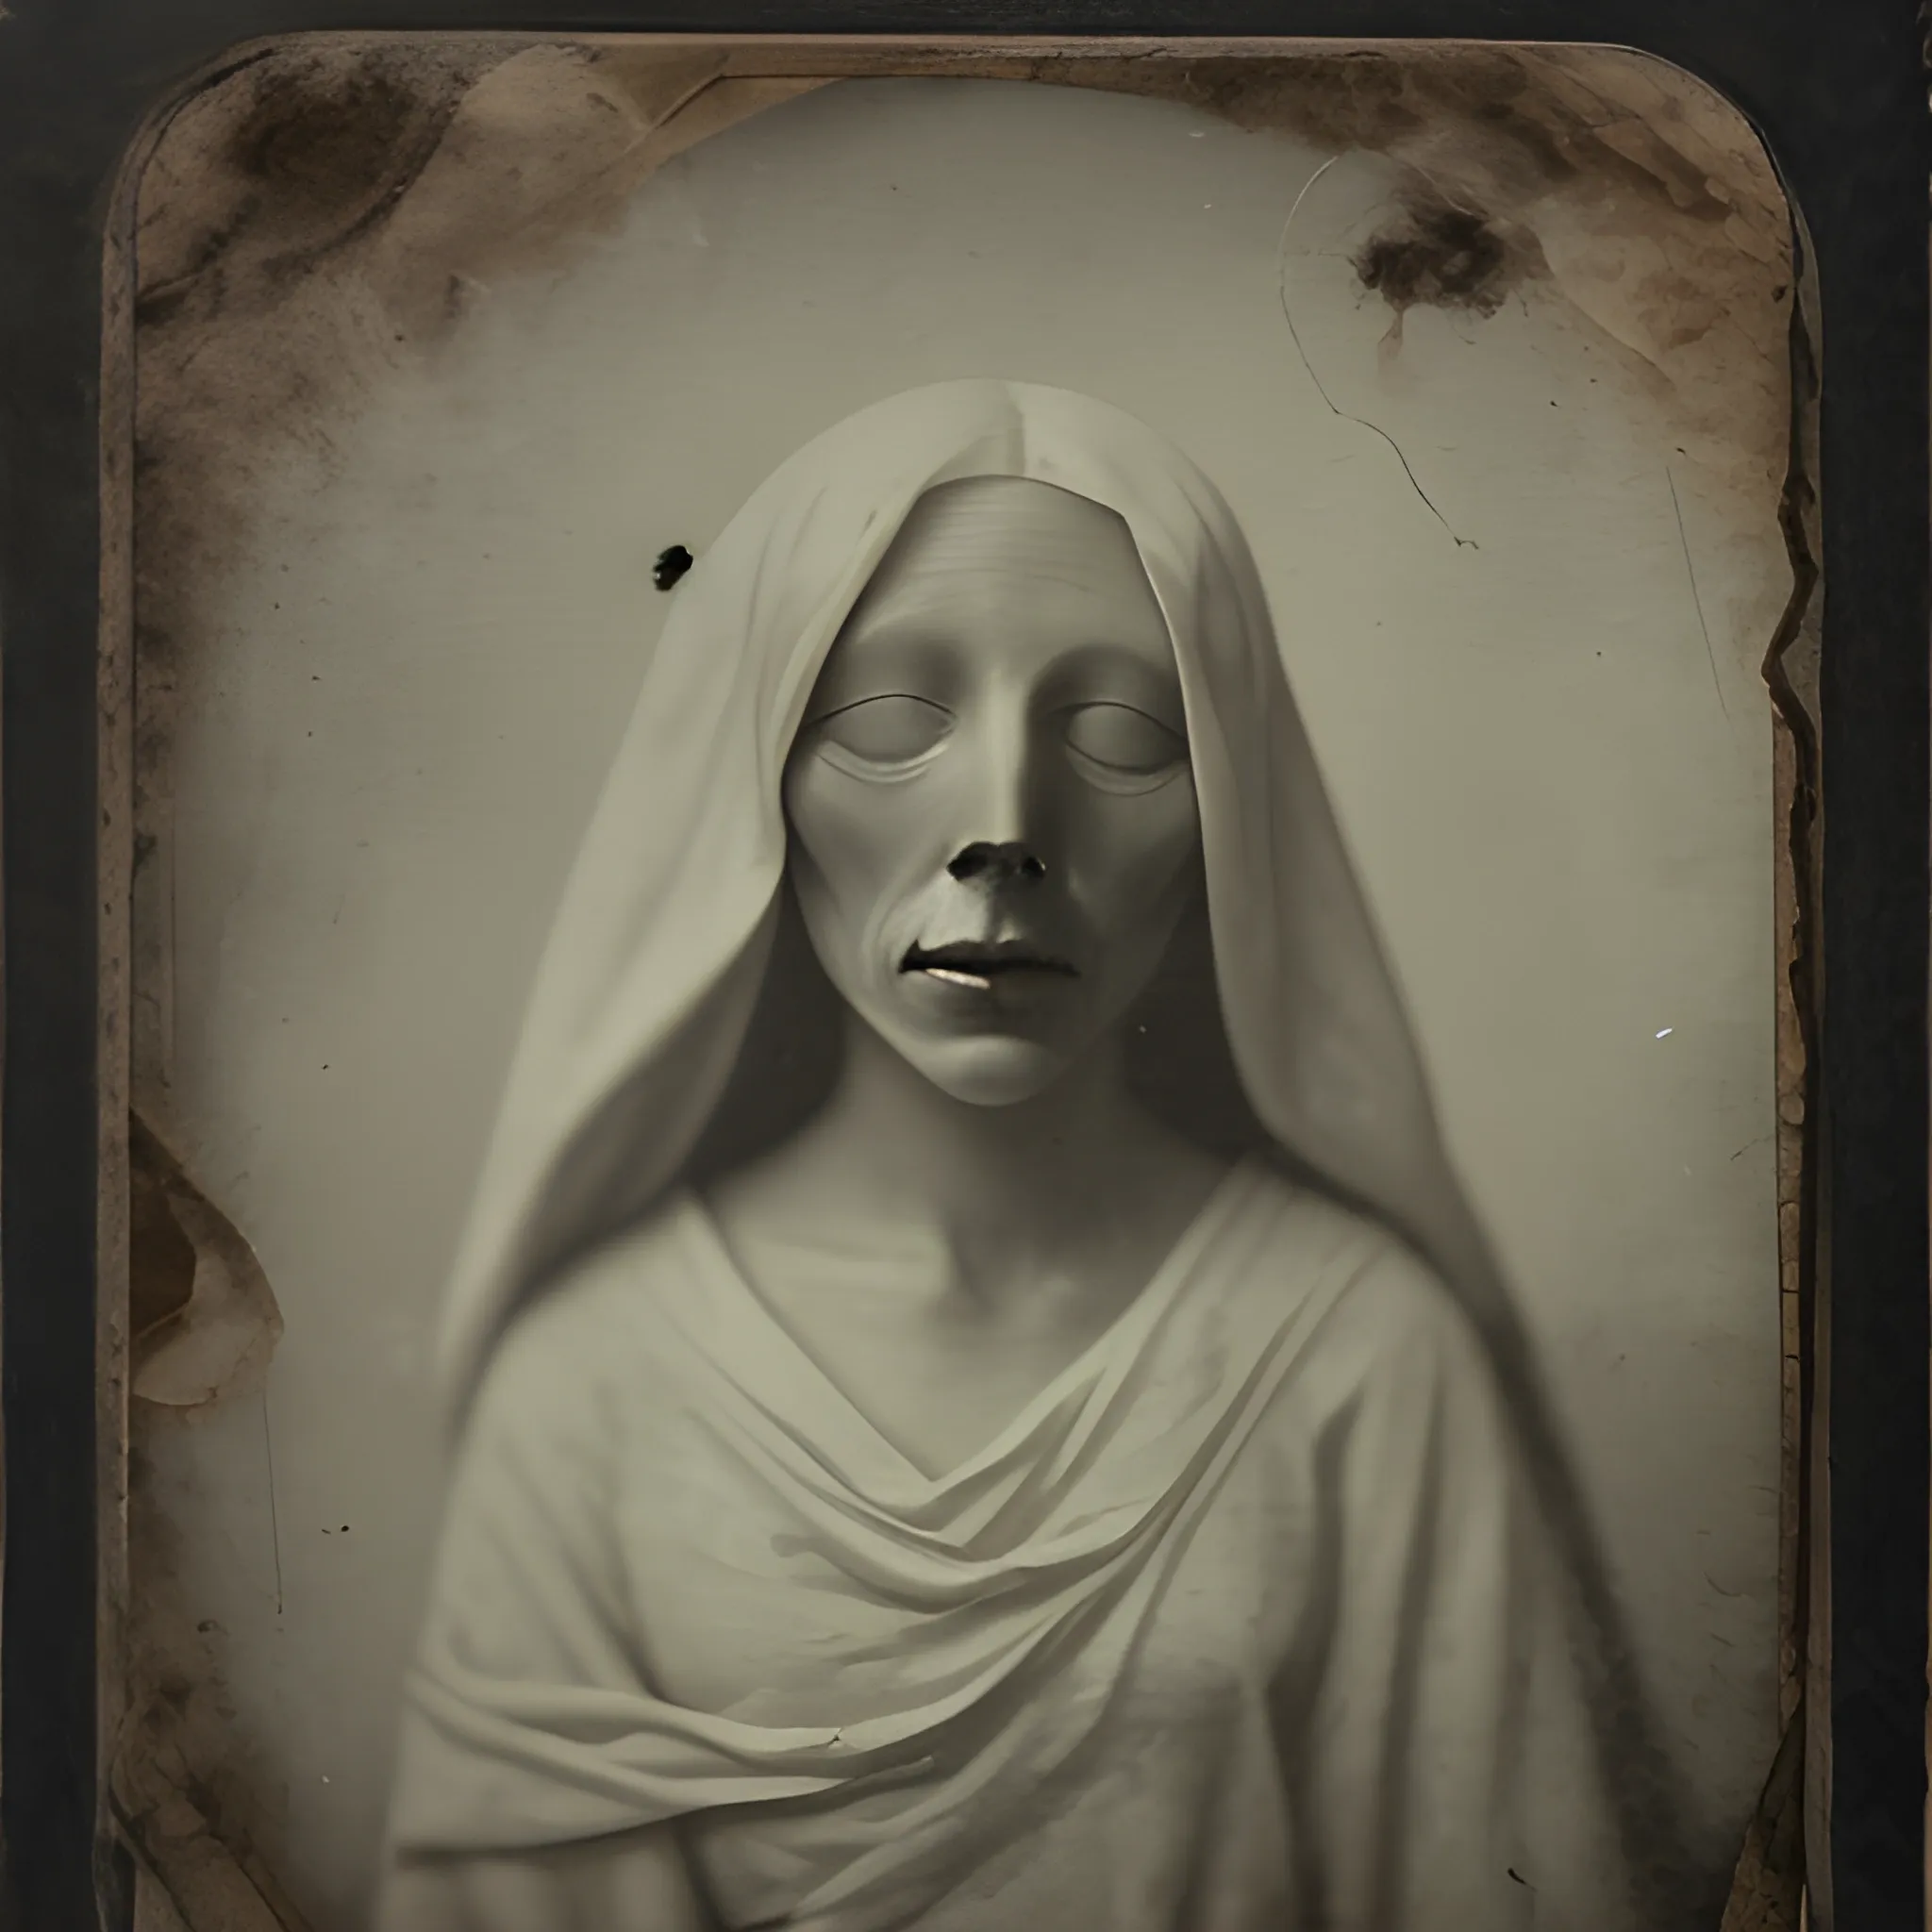 tintype photograph of a ghost draped in a white sheet, pale skin, (distressed image:0.3), no eyes, no eyeballs, missing eyes

